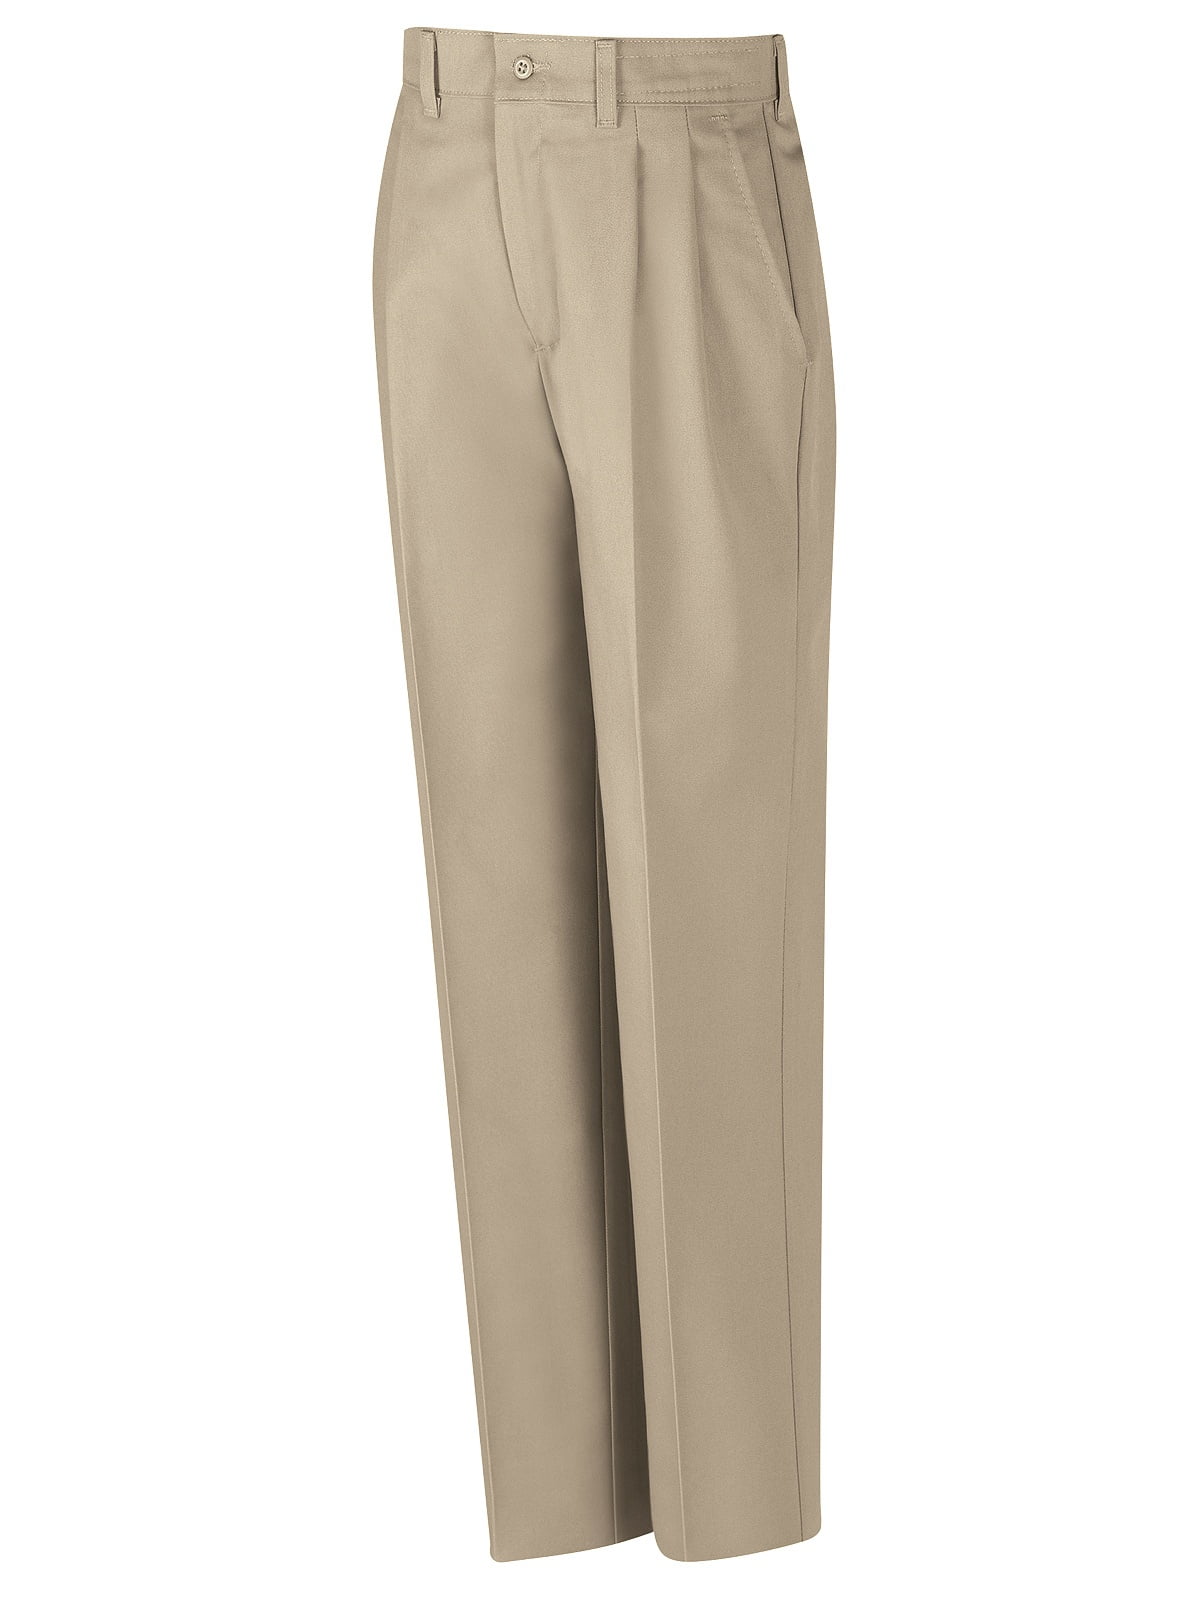 Red Kap - Red Kap - Pleated Work Pants - Odd & Extended Sizes - Color ...